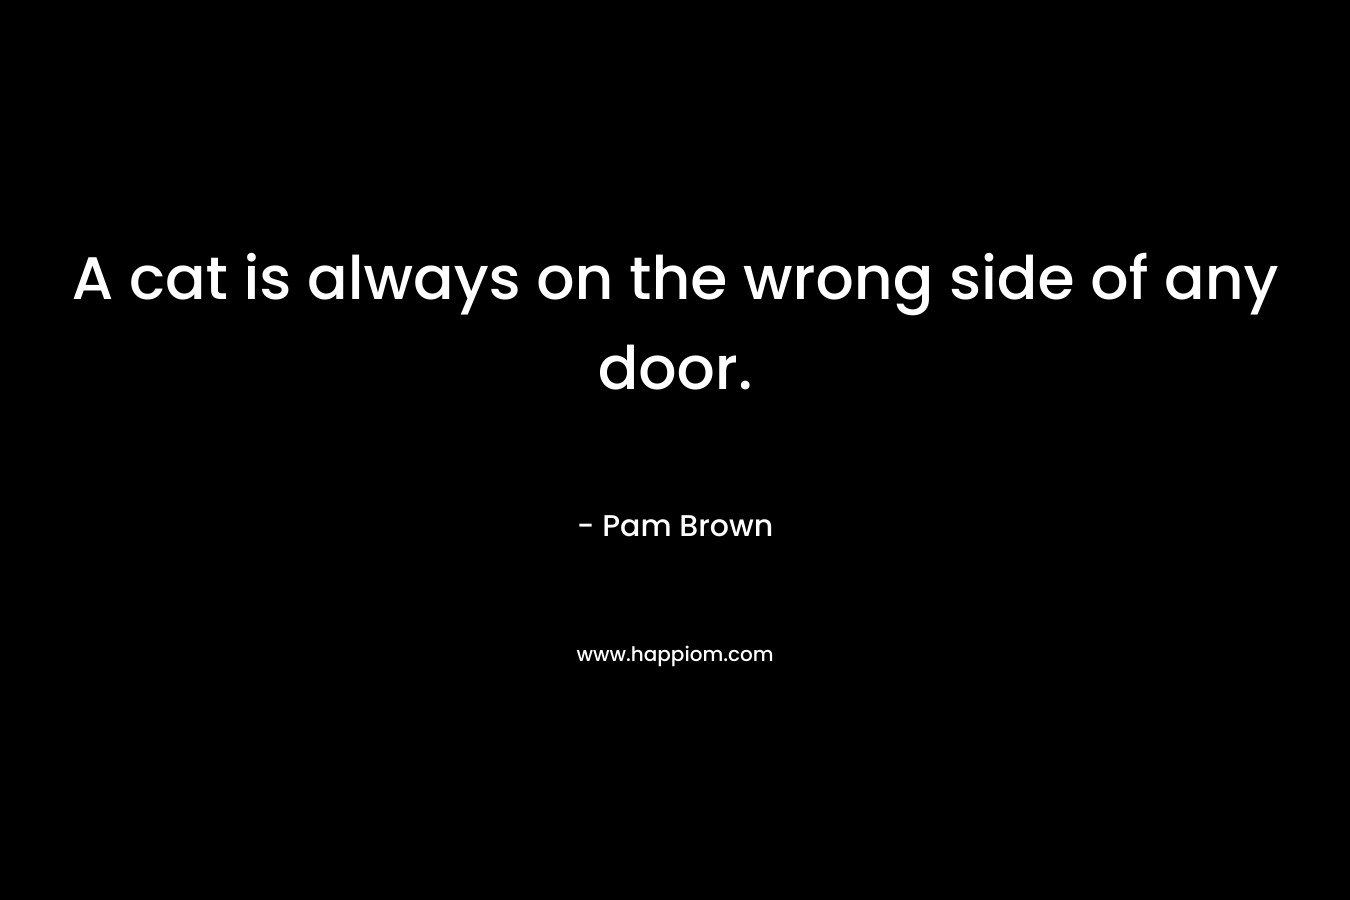 A cat is always on the wrong side of any door. – Pam Brown